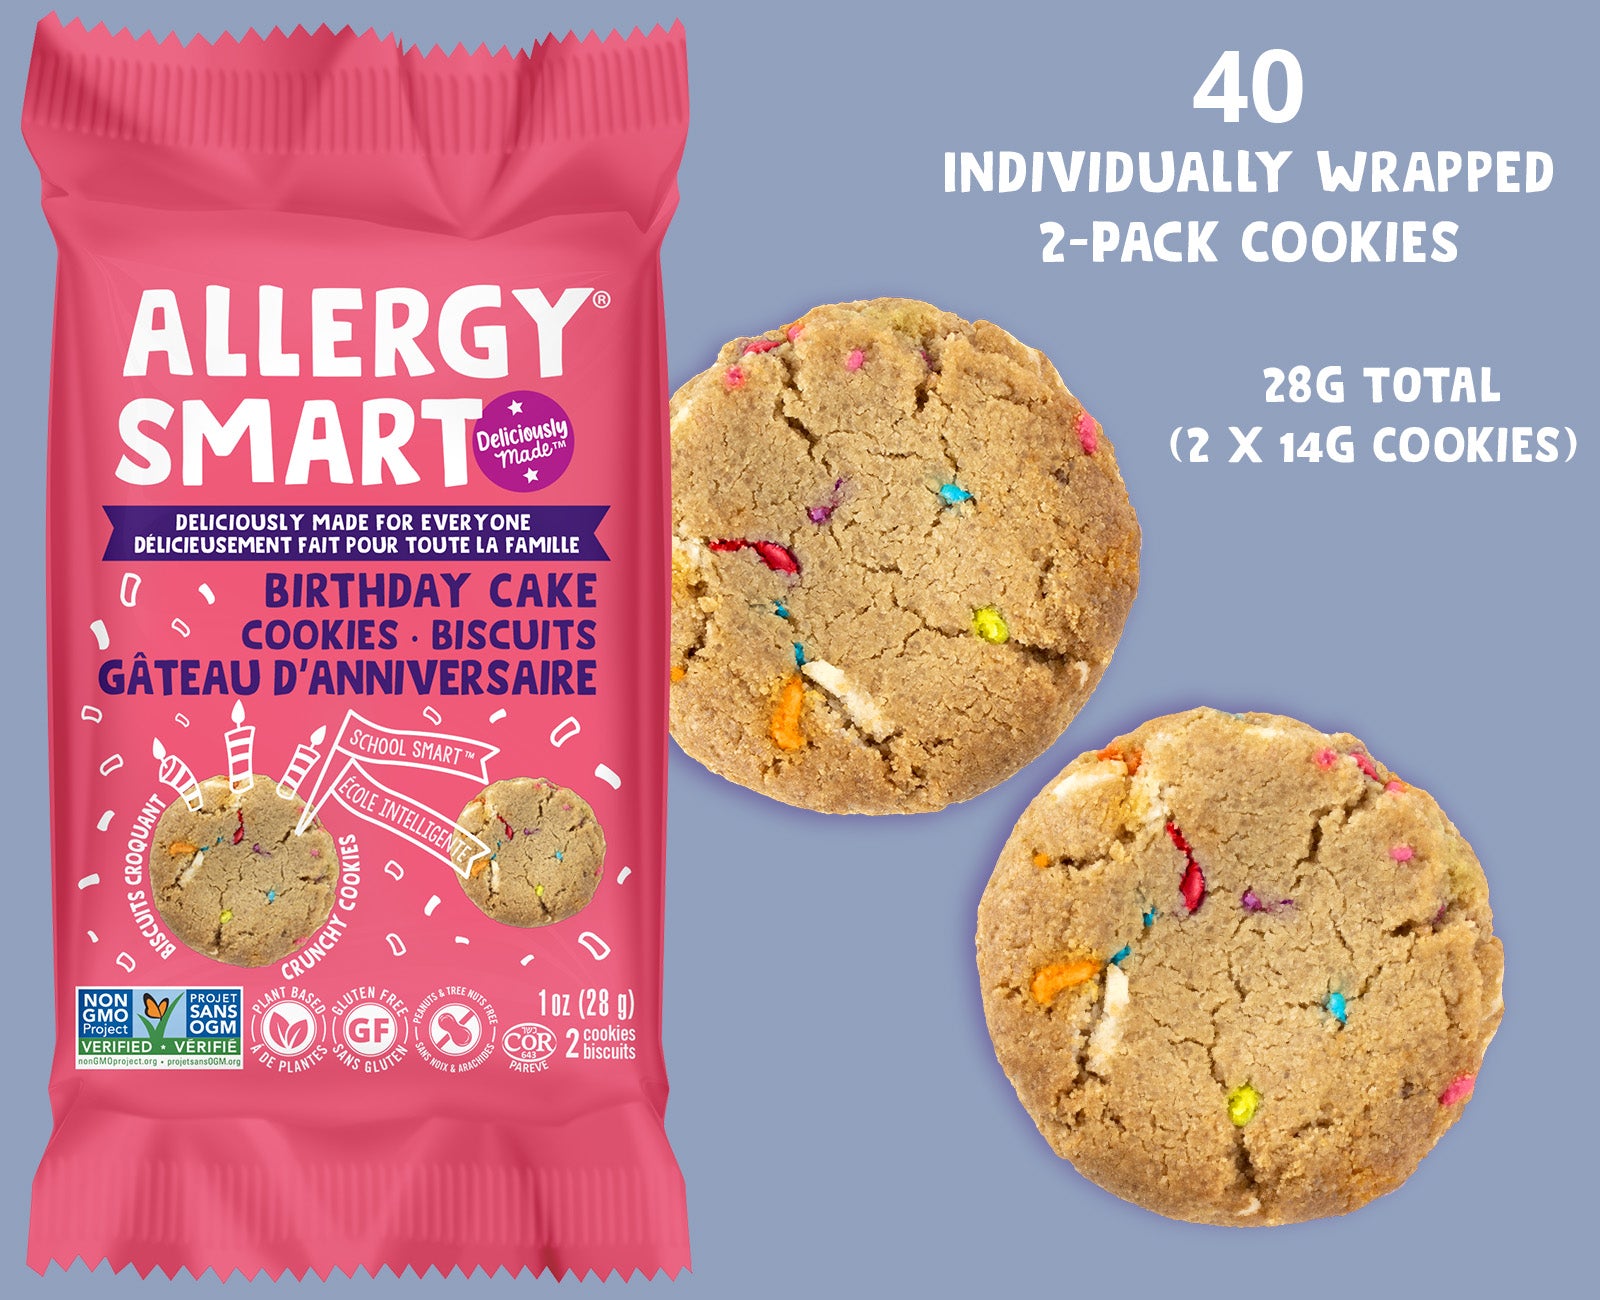 Birthday Cake Cookies | 40 Individually Wrapped 2-Pack Cookies